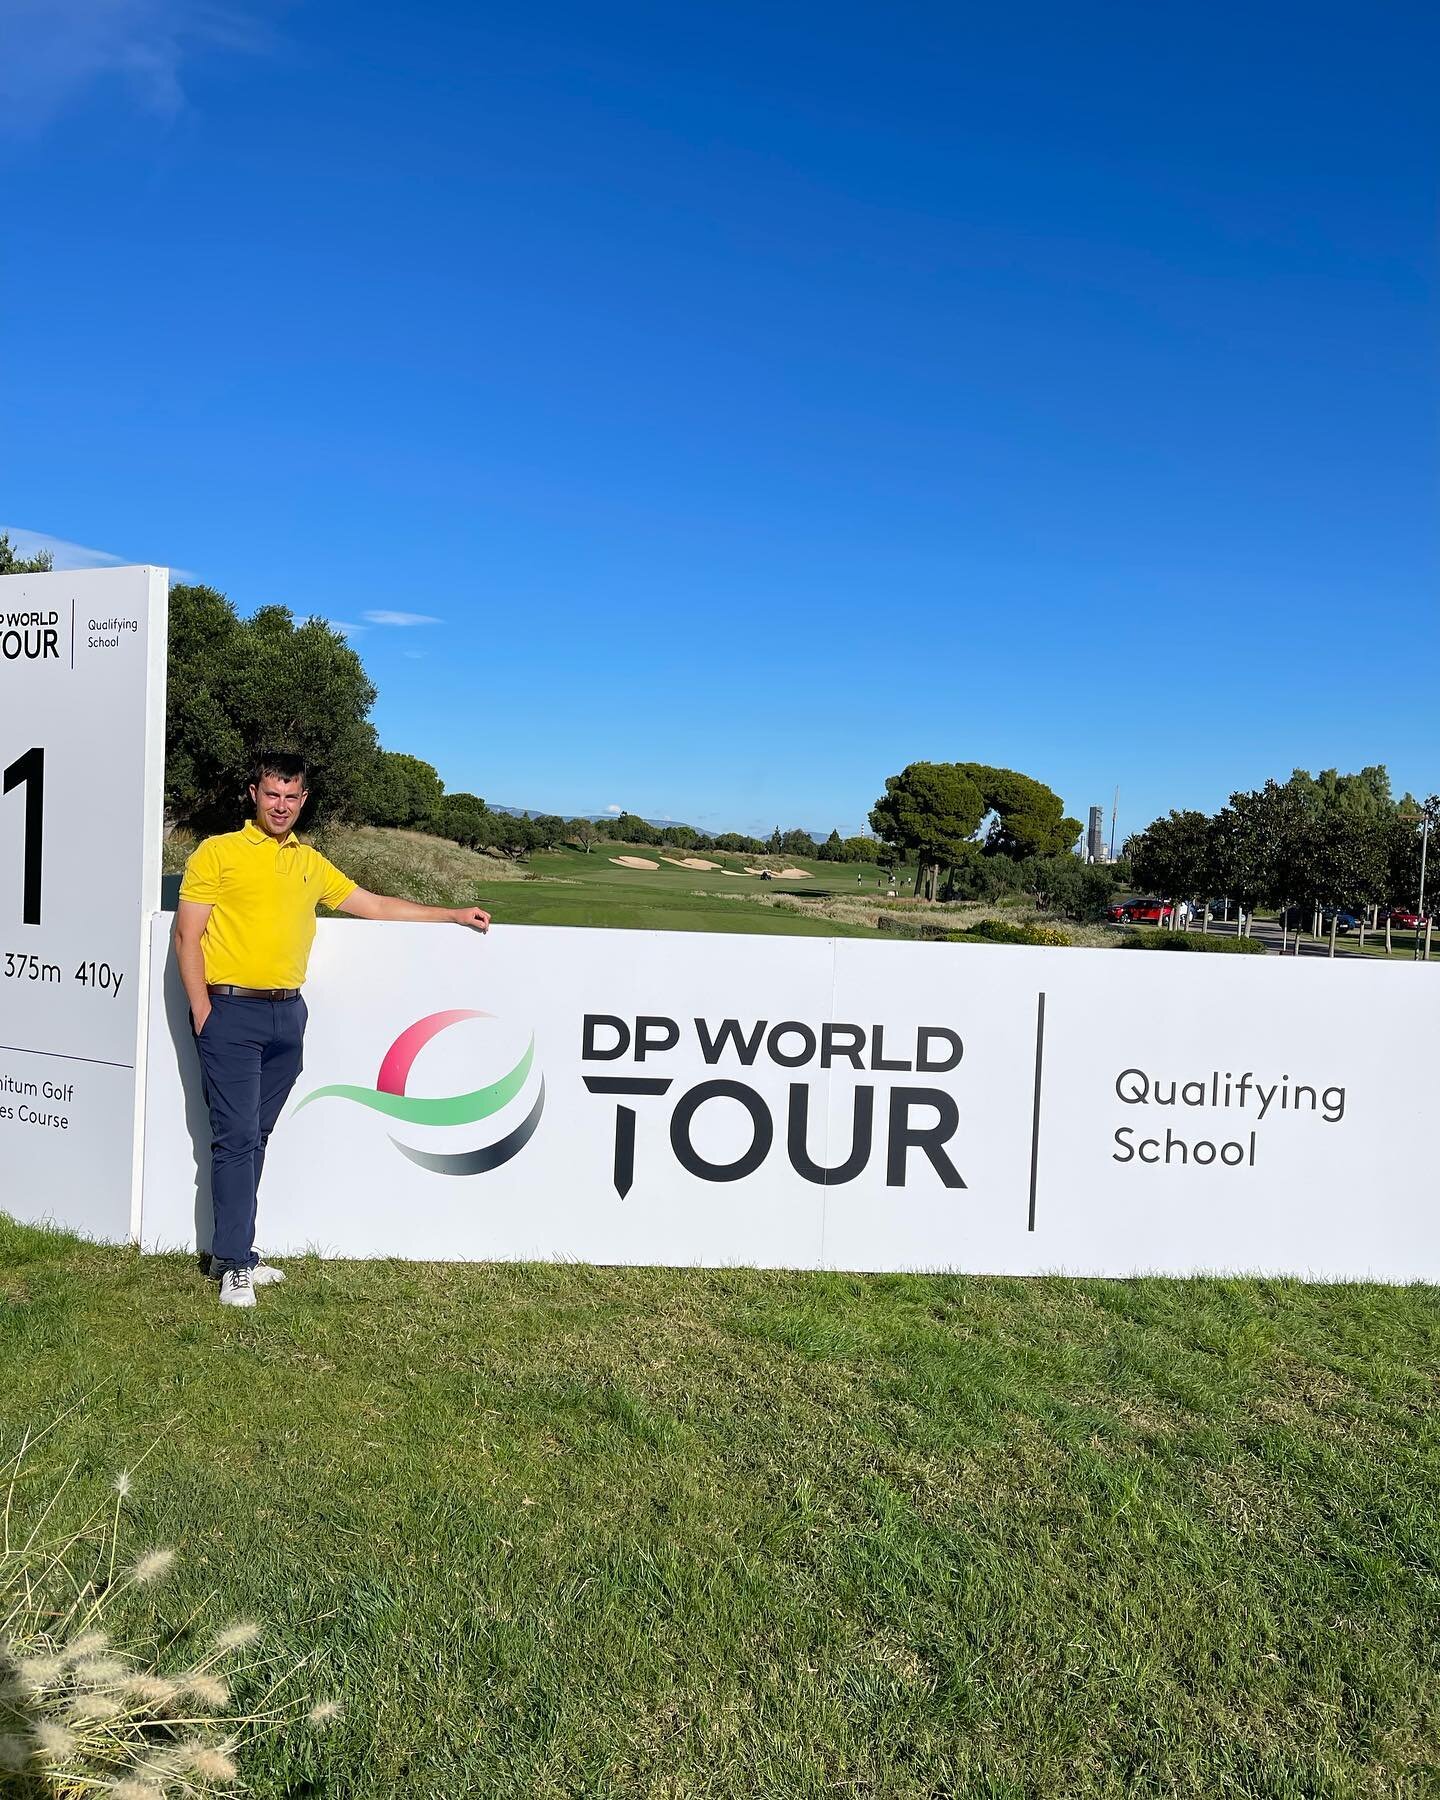 That&rsquo;s a wrap, the highs and lows of @dpwtqschool from amateurs to seasoned winners&hellip;
&bull;
All battling it out for @dpworldtour spots&hellip;
&bull;
Congratulations to @sforsstrom on a most amazing win the consistency of your golf was i